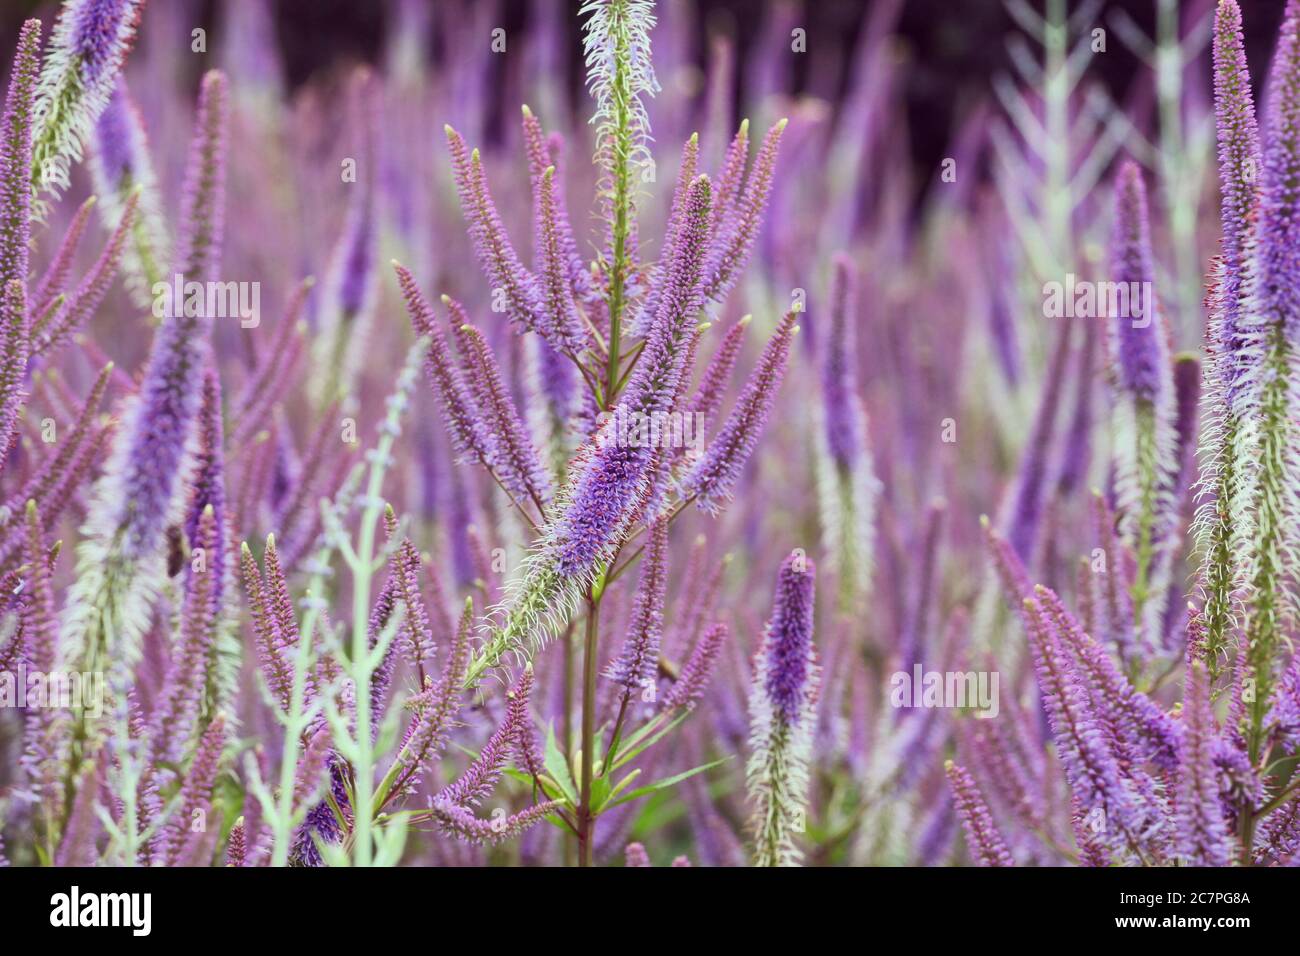 Pink and lilac spiked speedwell flowers 'Veronica spicata' in bloom Stock Photo